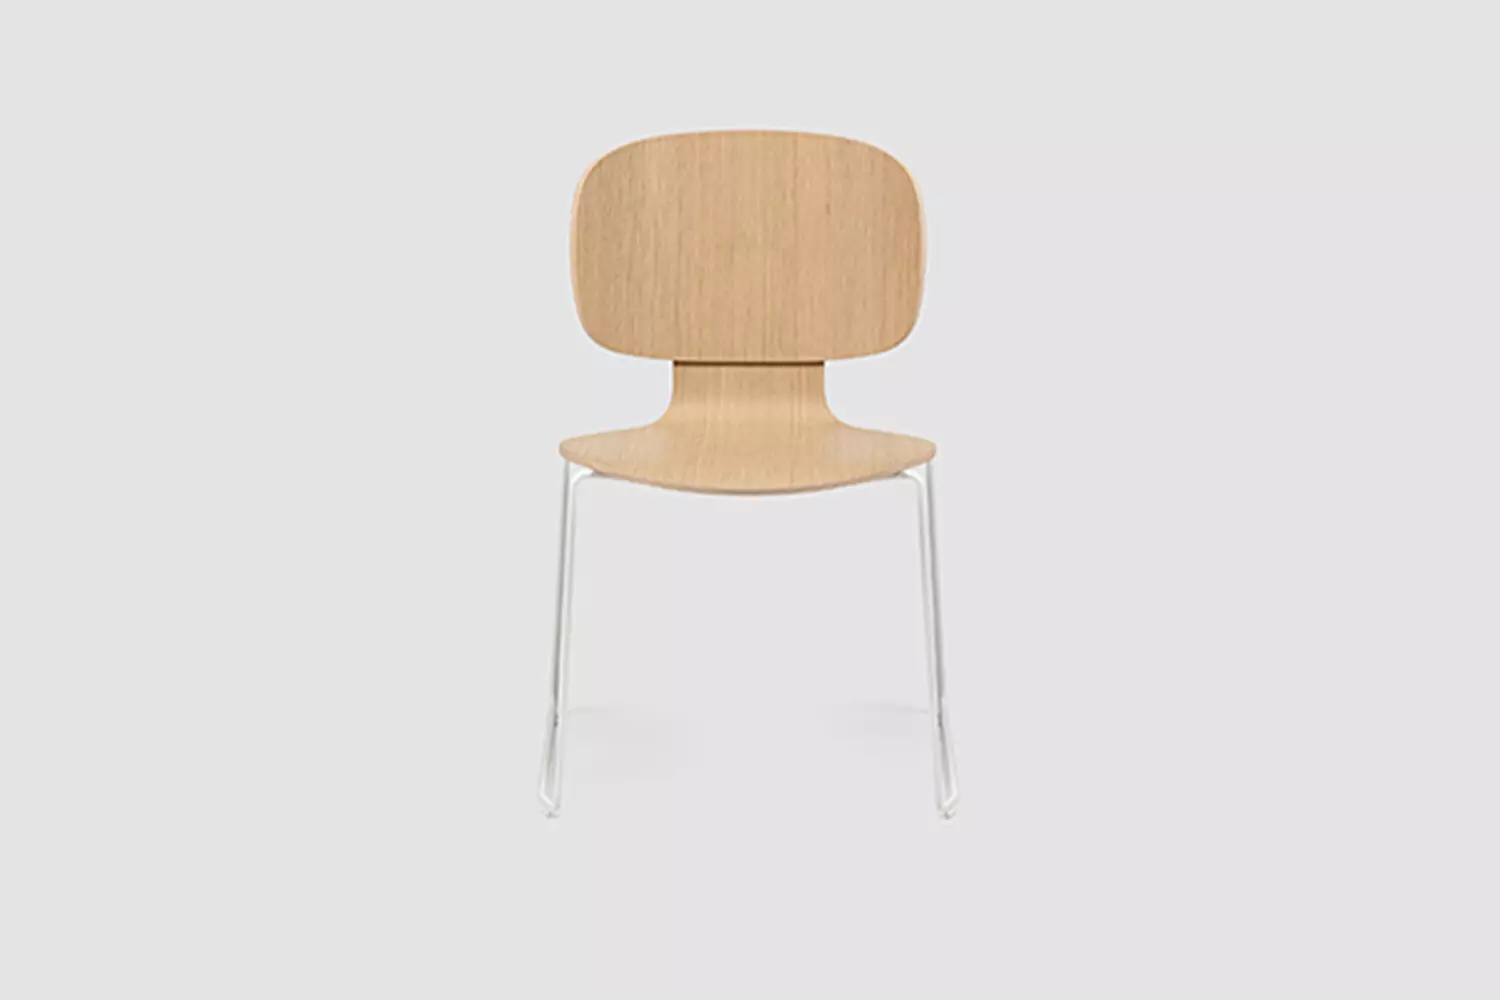 studio-chair-mit-kufengestell, Upholstered With armrests Non-pholstered Without armrests Skid Chair, Bene Office furniture, Image 1